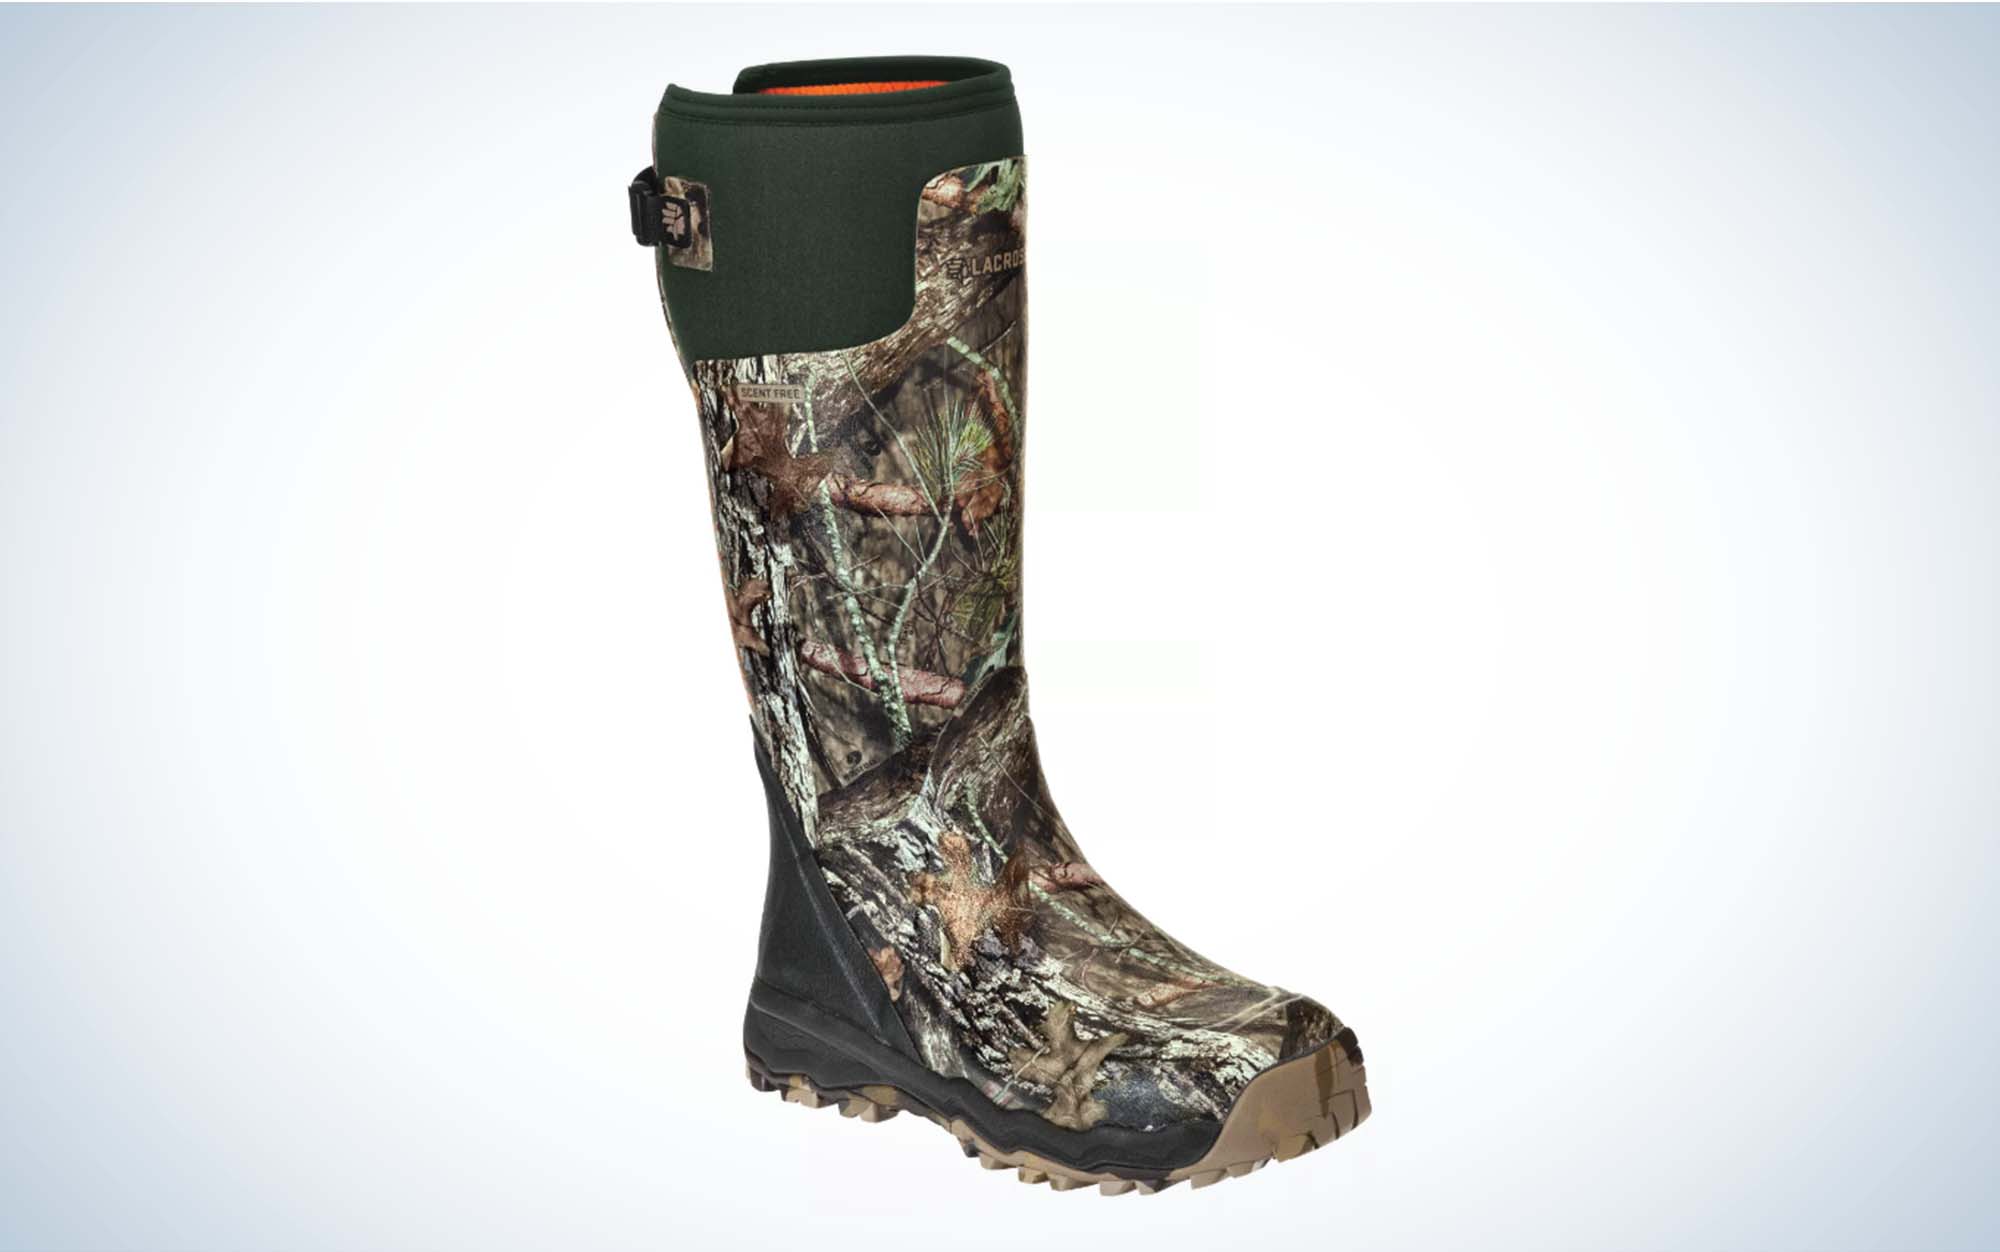 LaCrosse Alphaburly Pro are the best upland hunting boots